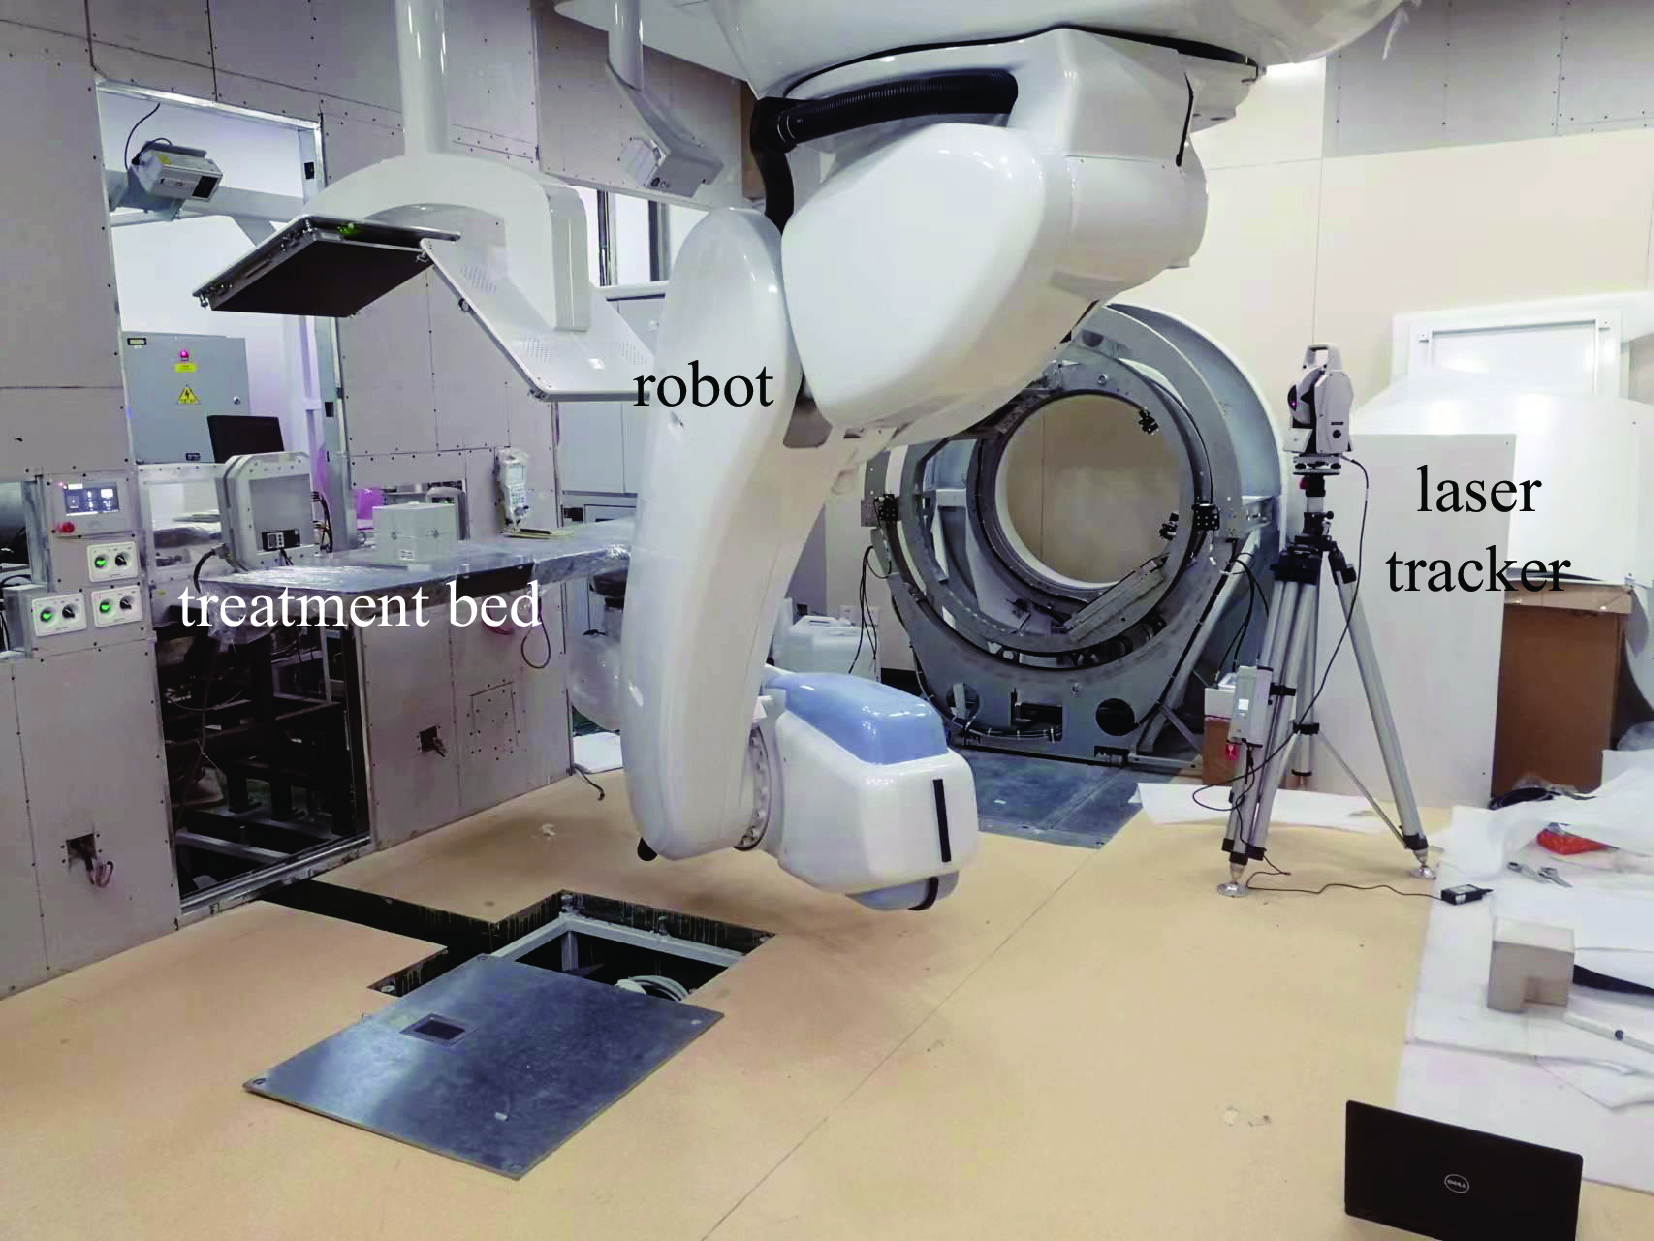 Treatment room robot and treatment bed